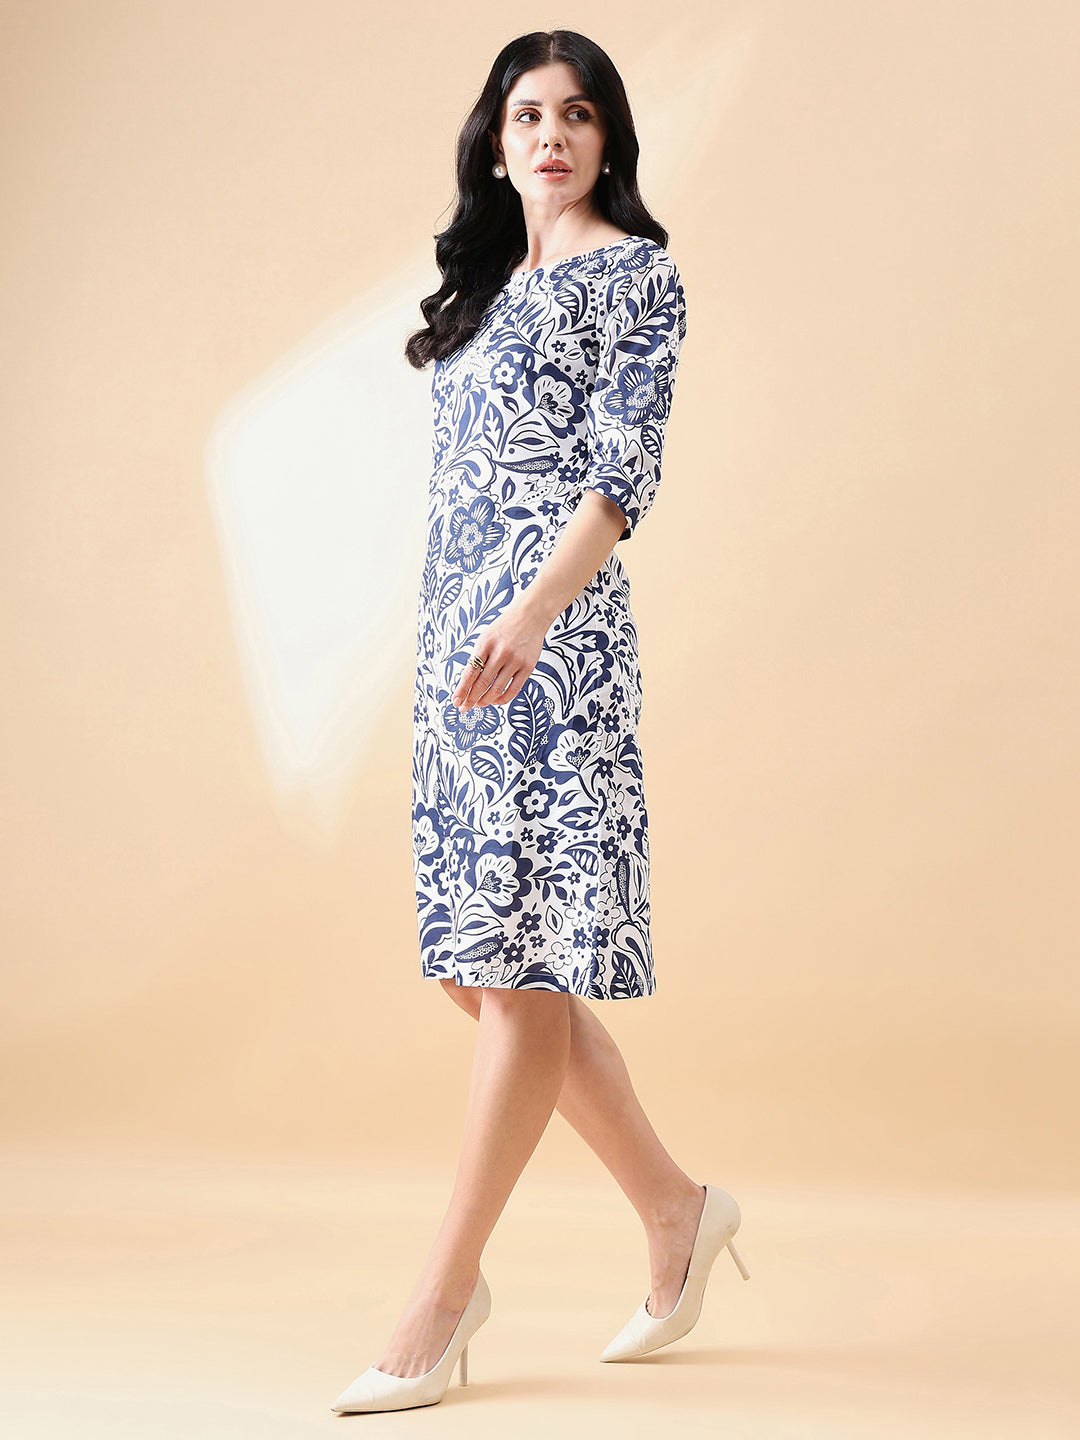 Navy-Blue-&-White-Cotton-A-Line-Floral-Printed-Dress